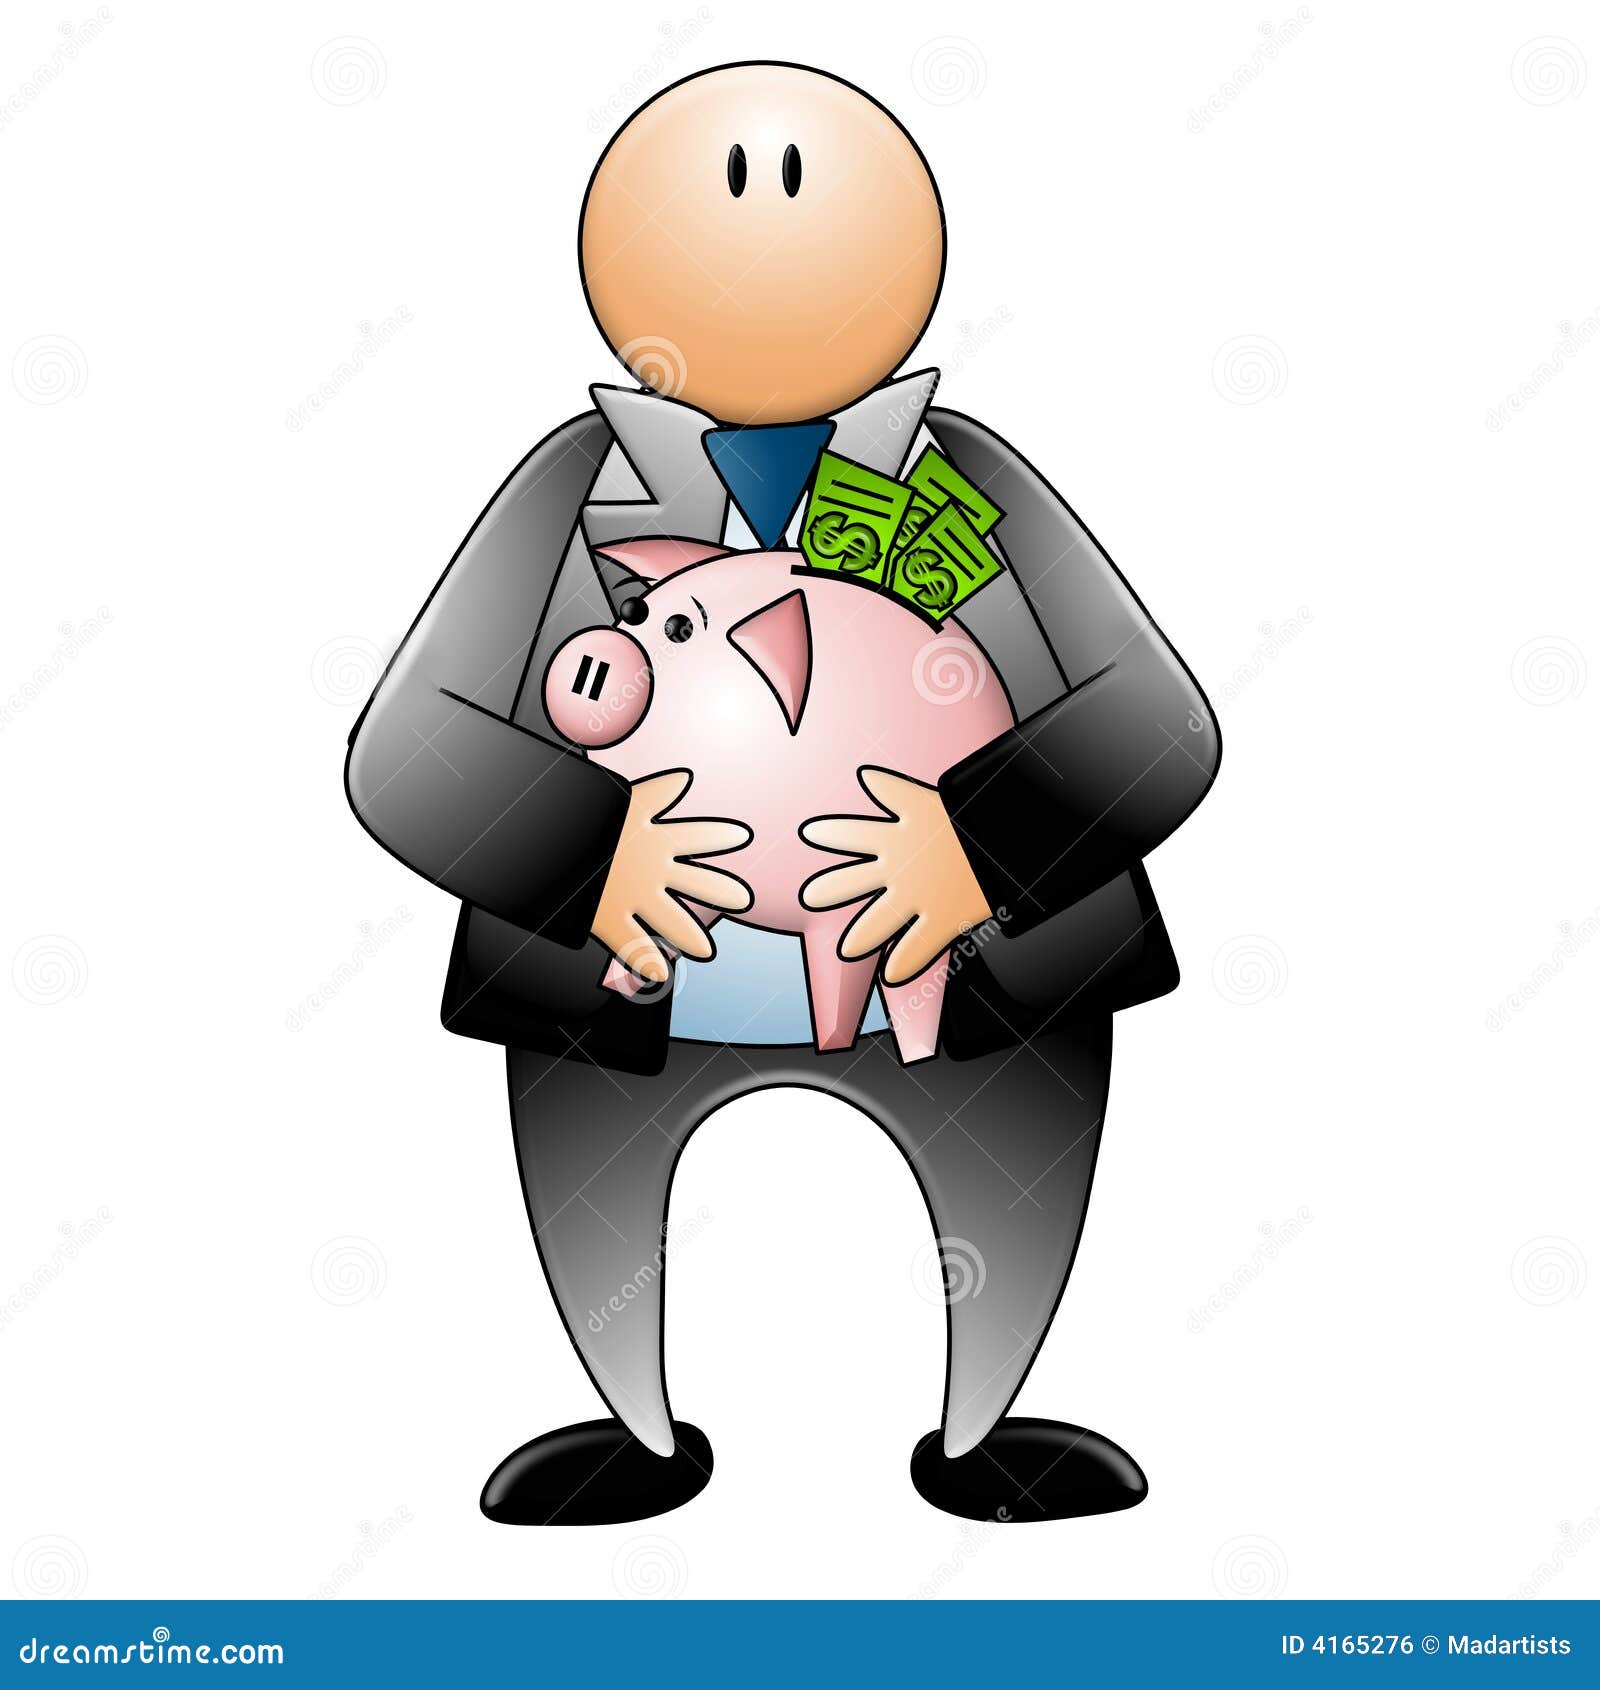 clip art images of bank - photo #33